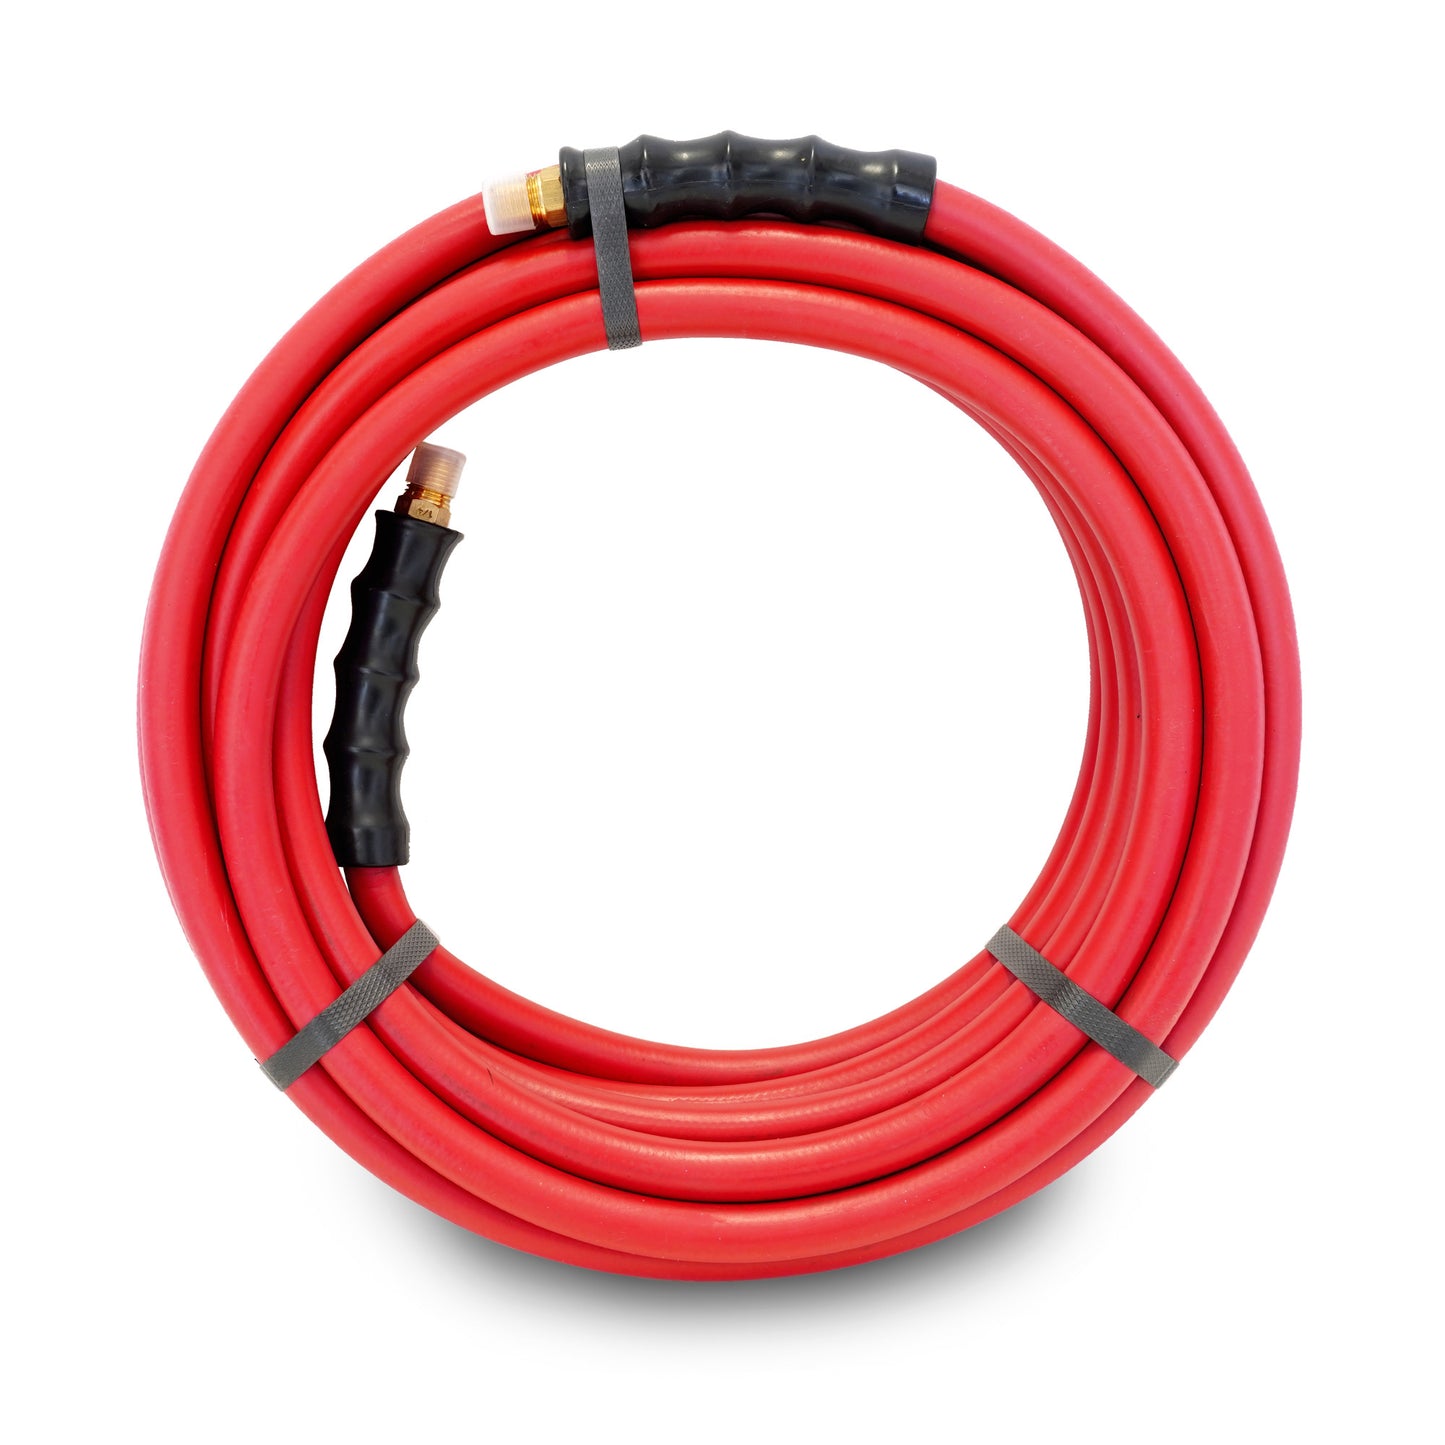 30-Foot 3/8-Inch ID Rubber Air Hose with 1/4-Inch NPT Brass Fittings